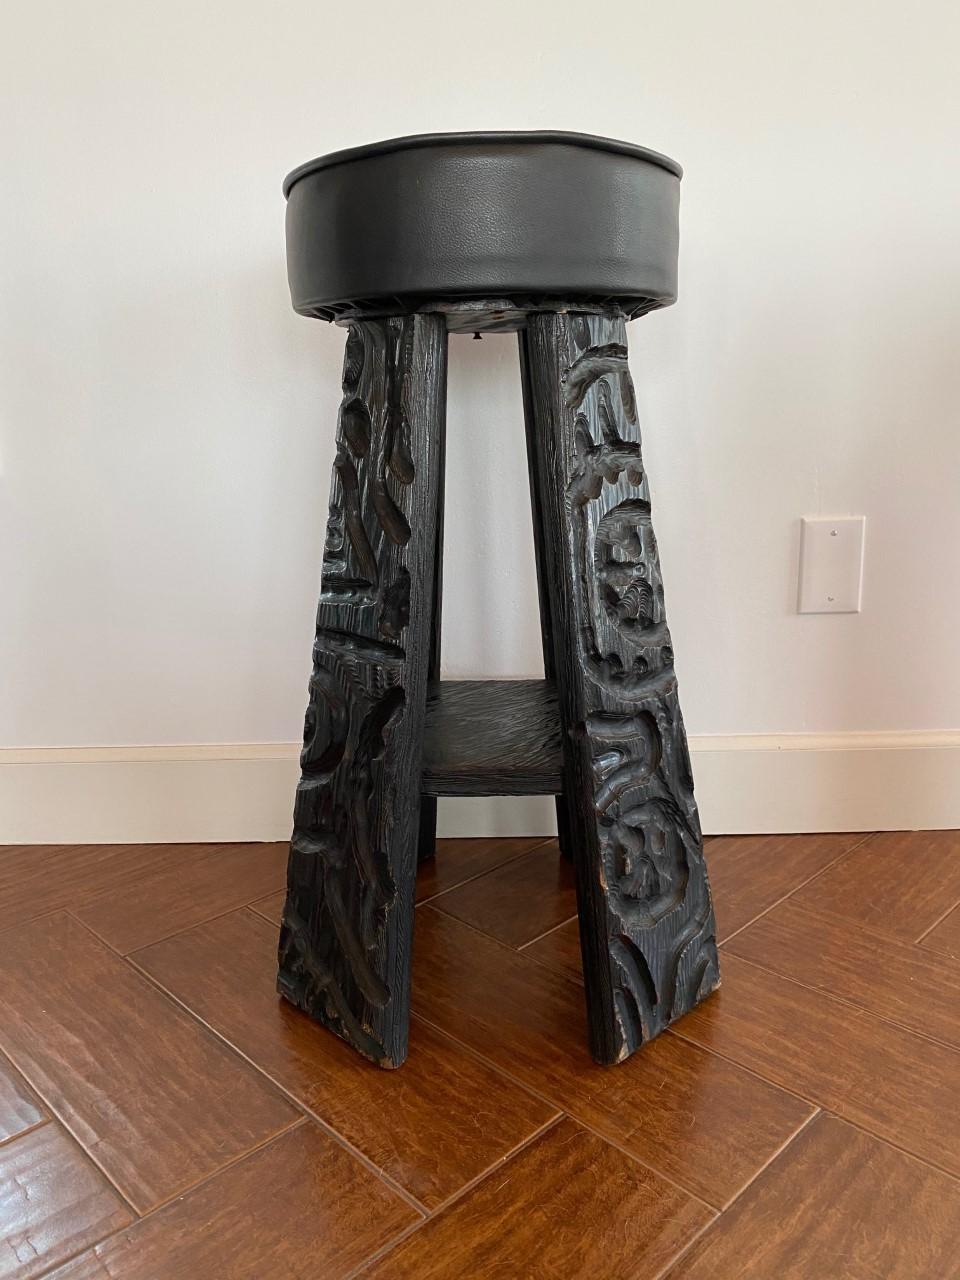 Set of 2 solid wood Tiki bar stools. Each stool has 4 paneled legs that have been carved in a beautiful South Pacific primitive style. This set will enhance your Tiki decor and accentuate other decor styles that accommodate strong and beautiful